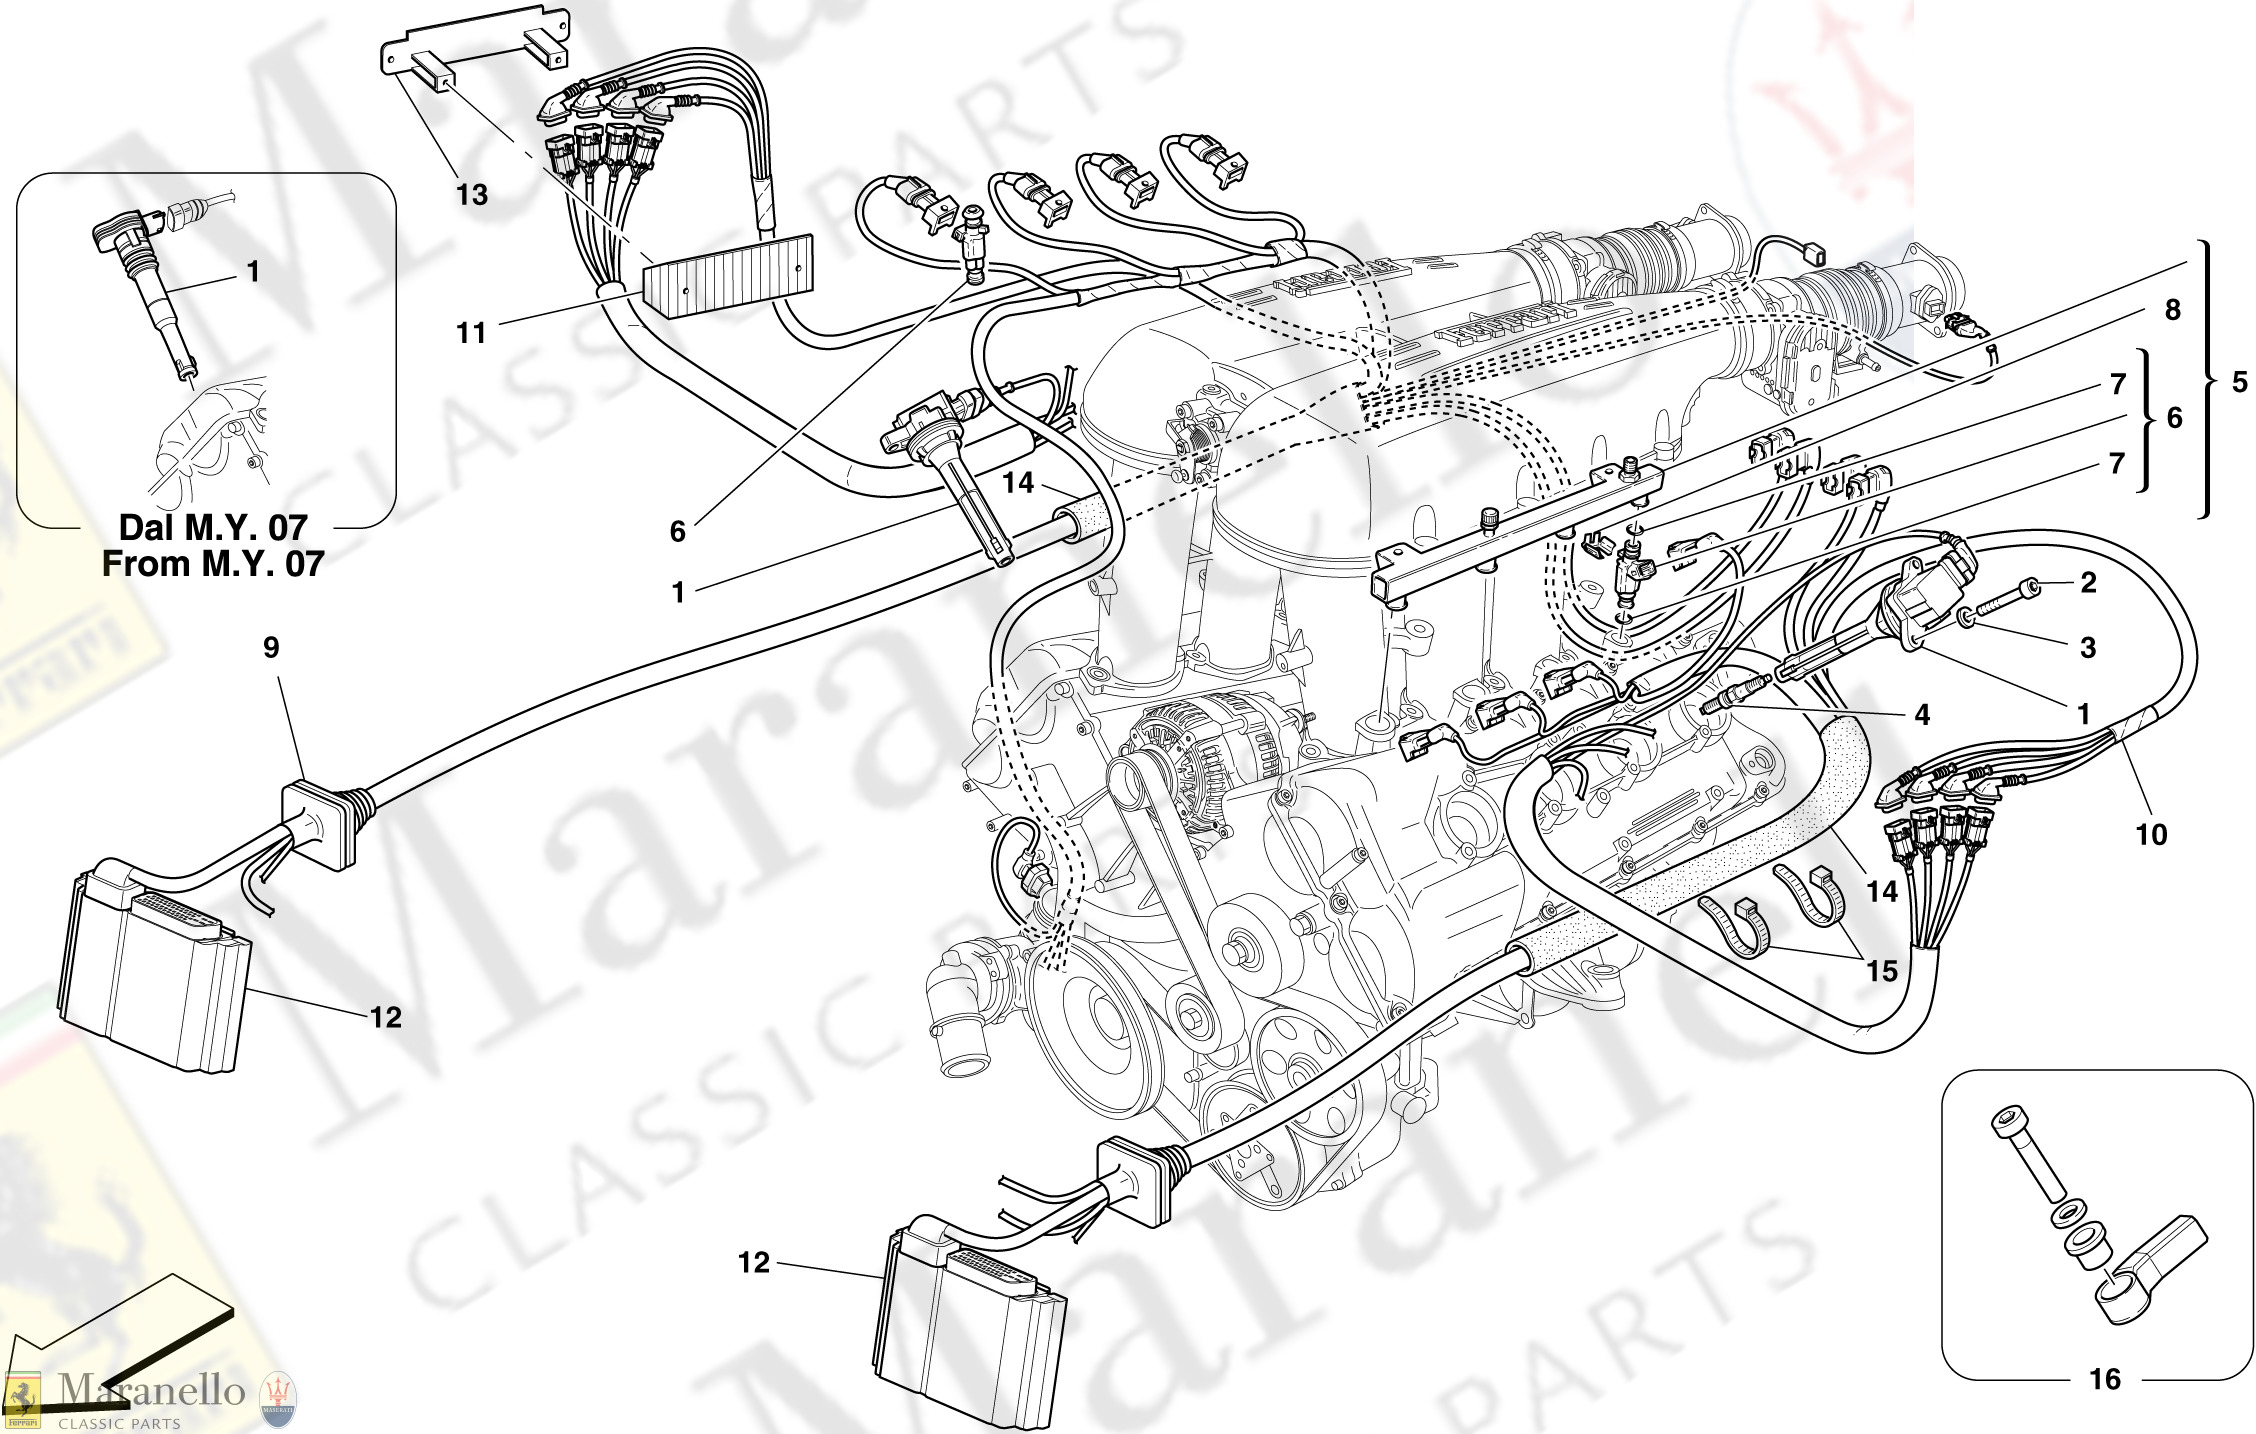 007 - Injection - Ignition System